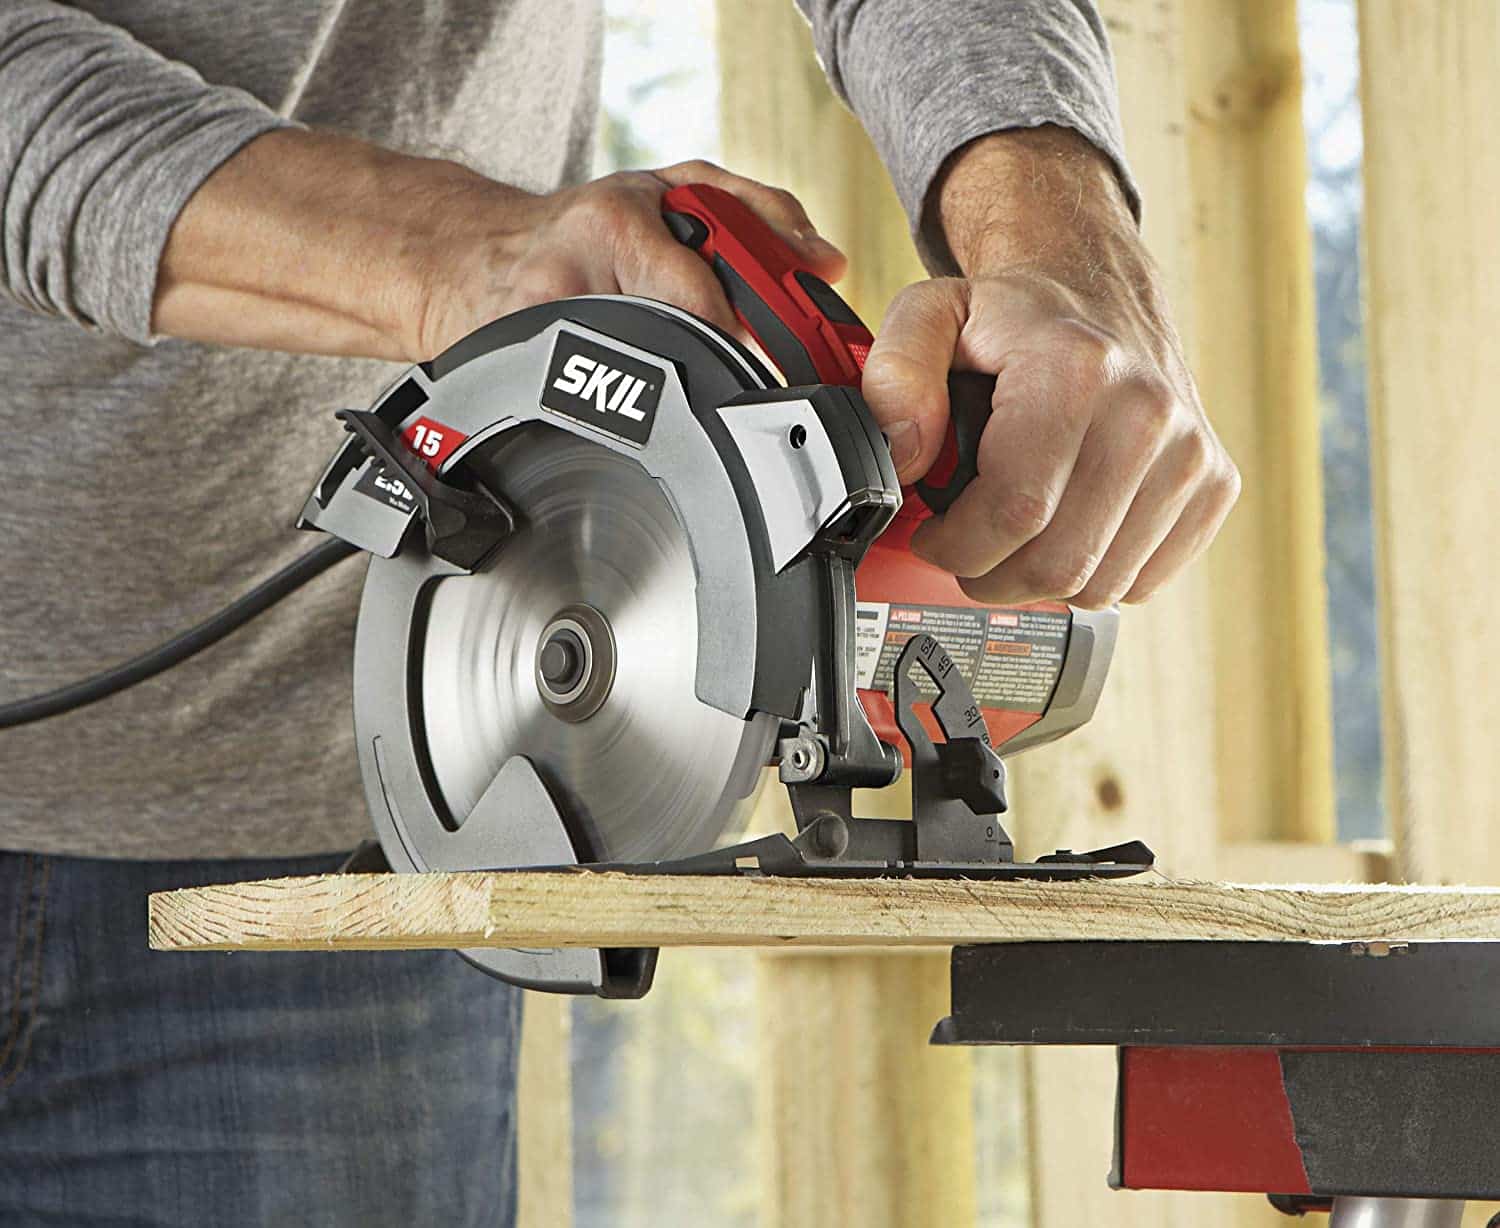 SKIL 5280-01 15-Amp 7-1 4-Inch Circular Saw with Single Beam Laser Guide - in action